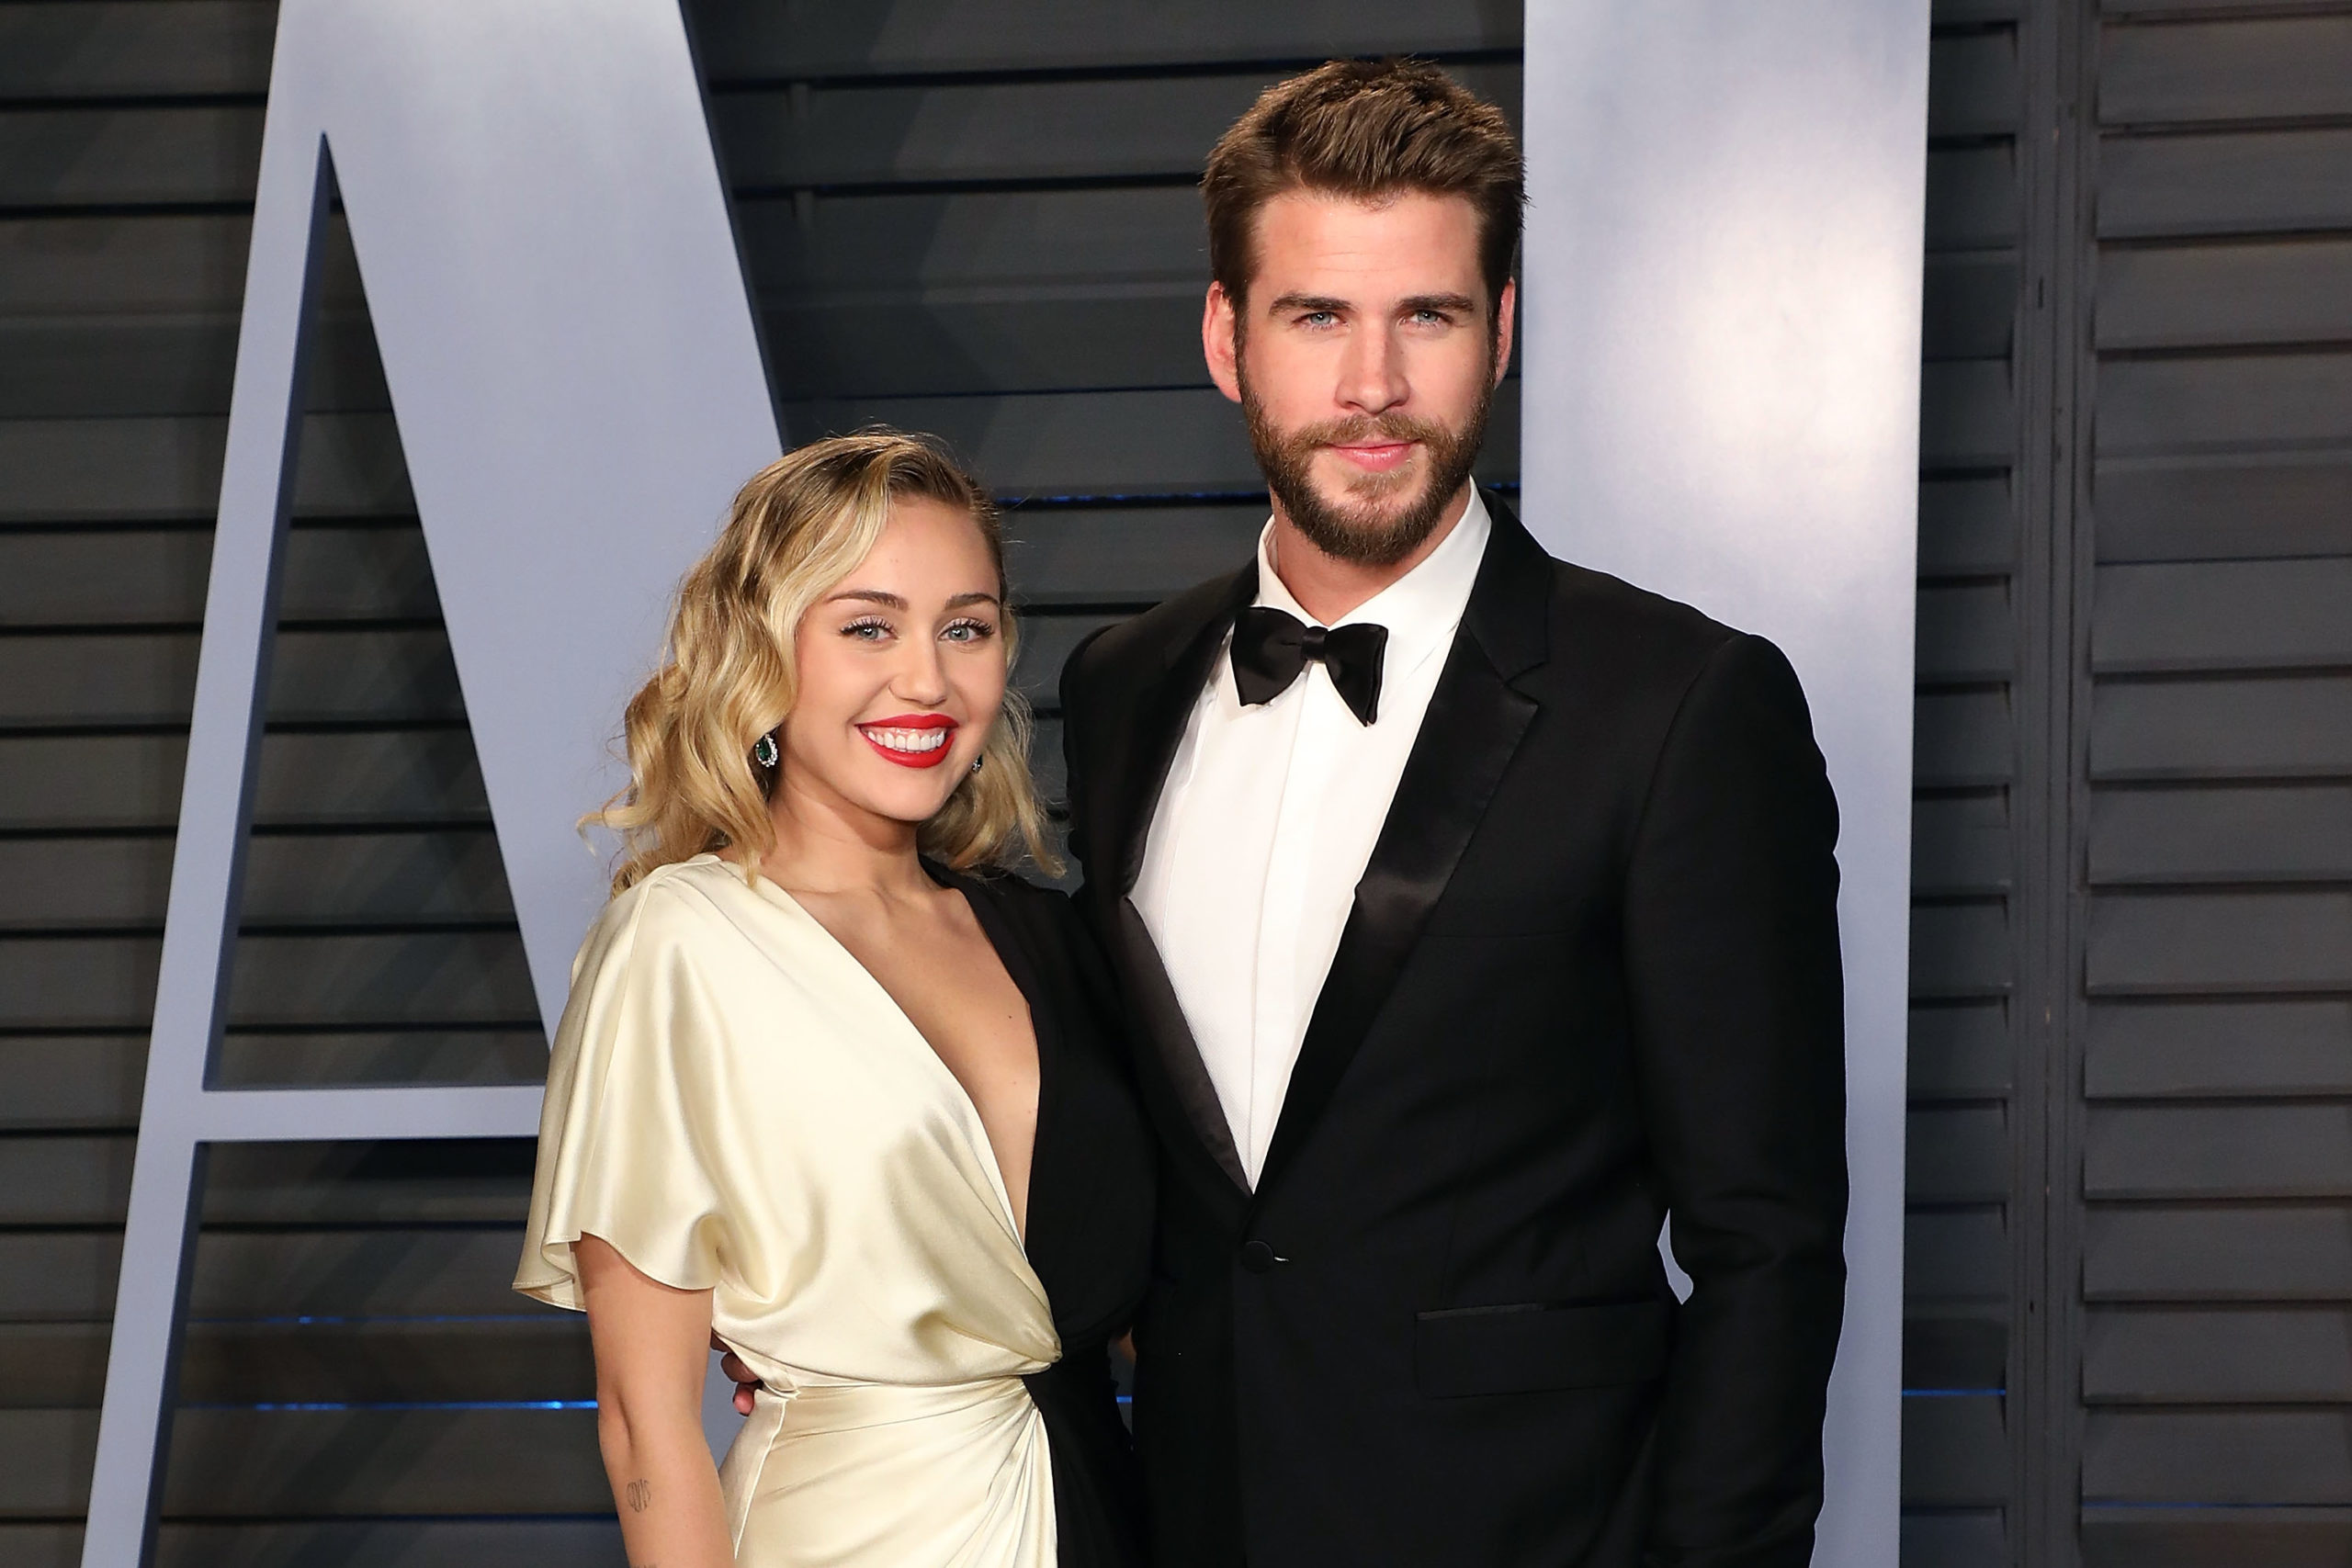 Miley Cyrus On Liam Hemsworth Divorce It Felt Like A Relapse Every Time I'd Go Back